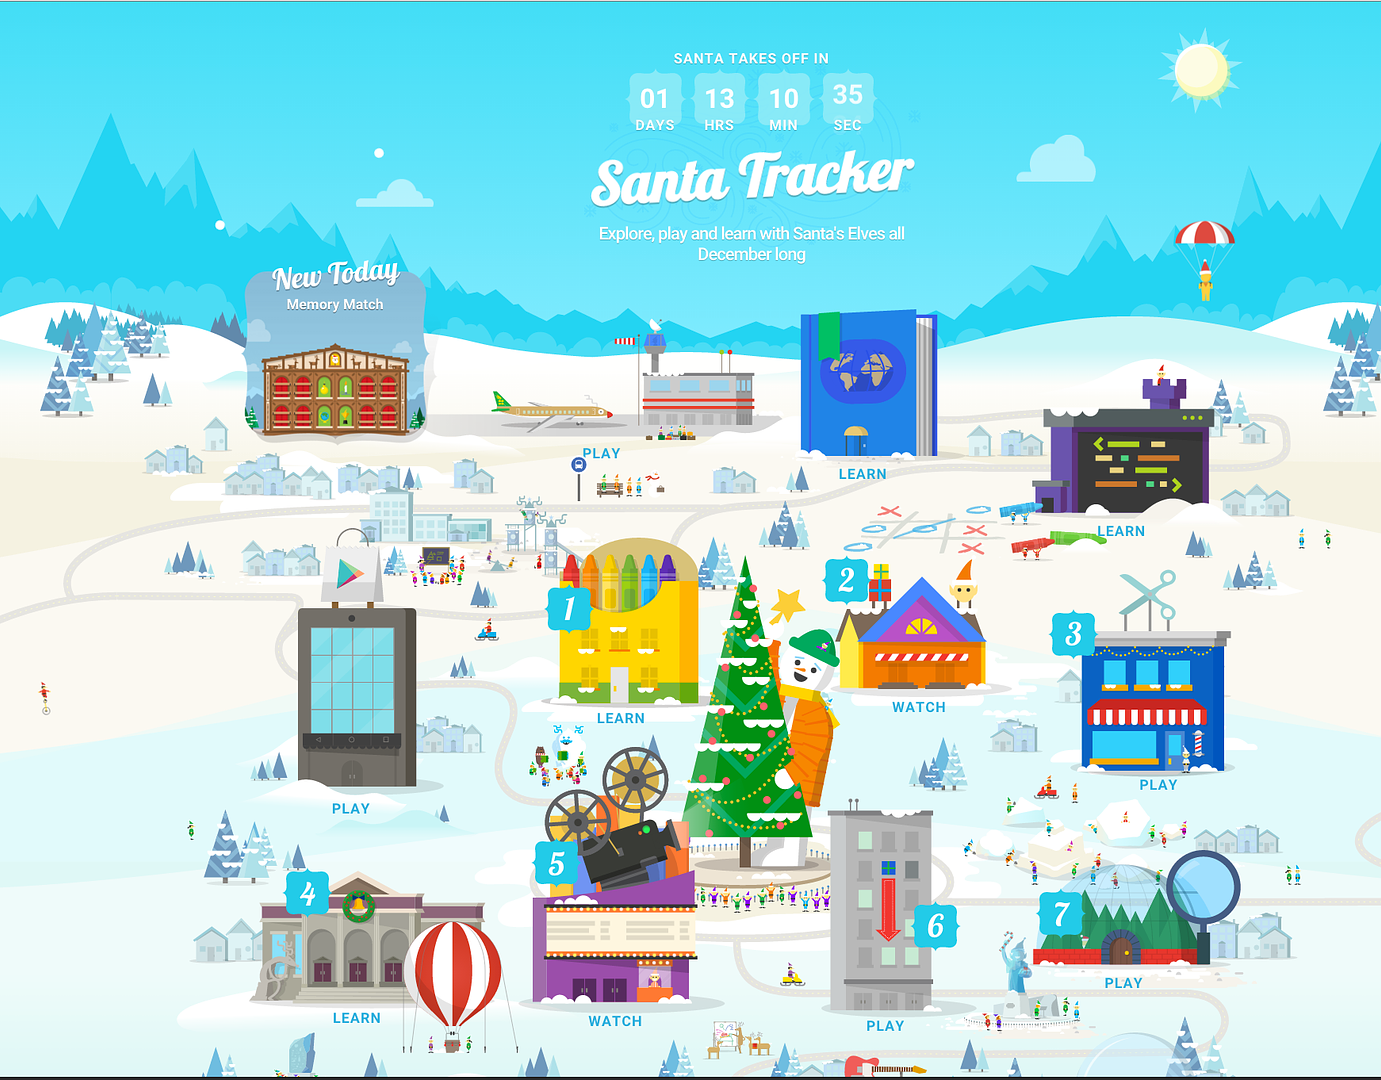 Google Santa Tracker: Countdown to Christmas with a great new minigame or video each day, then track his whereabouts on Christmas eve.